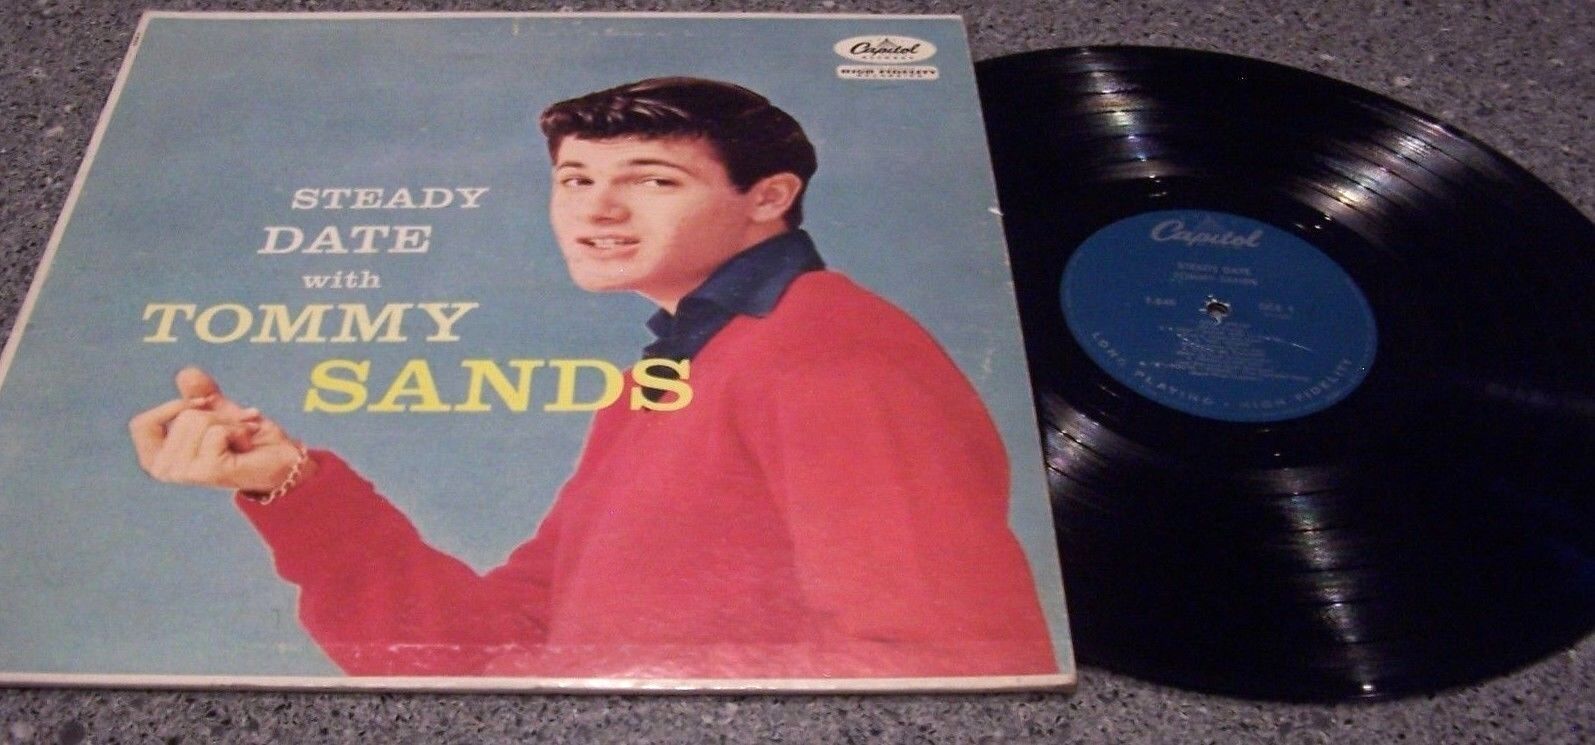 Tommy Sands "Steady Date" TURQUOISE CAPITOL RECORD MONO DEBUT LP T-848 